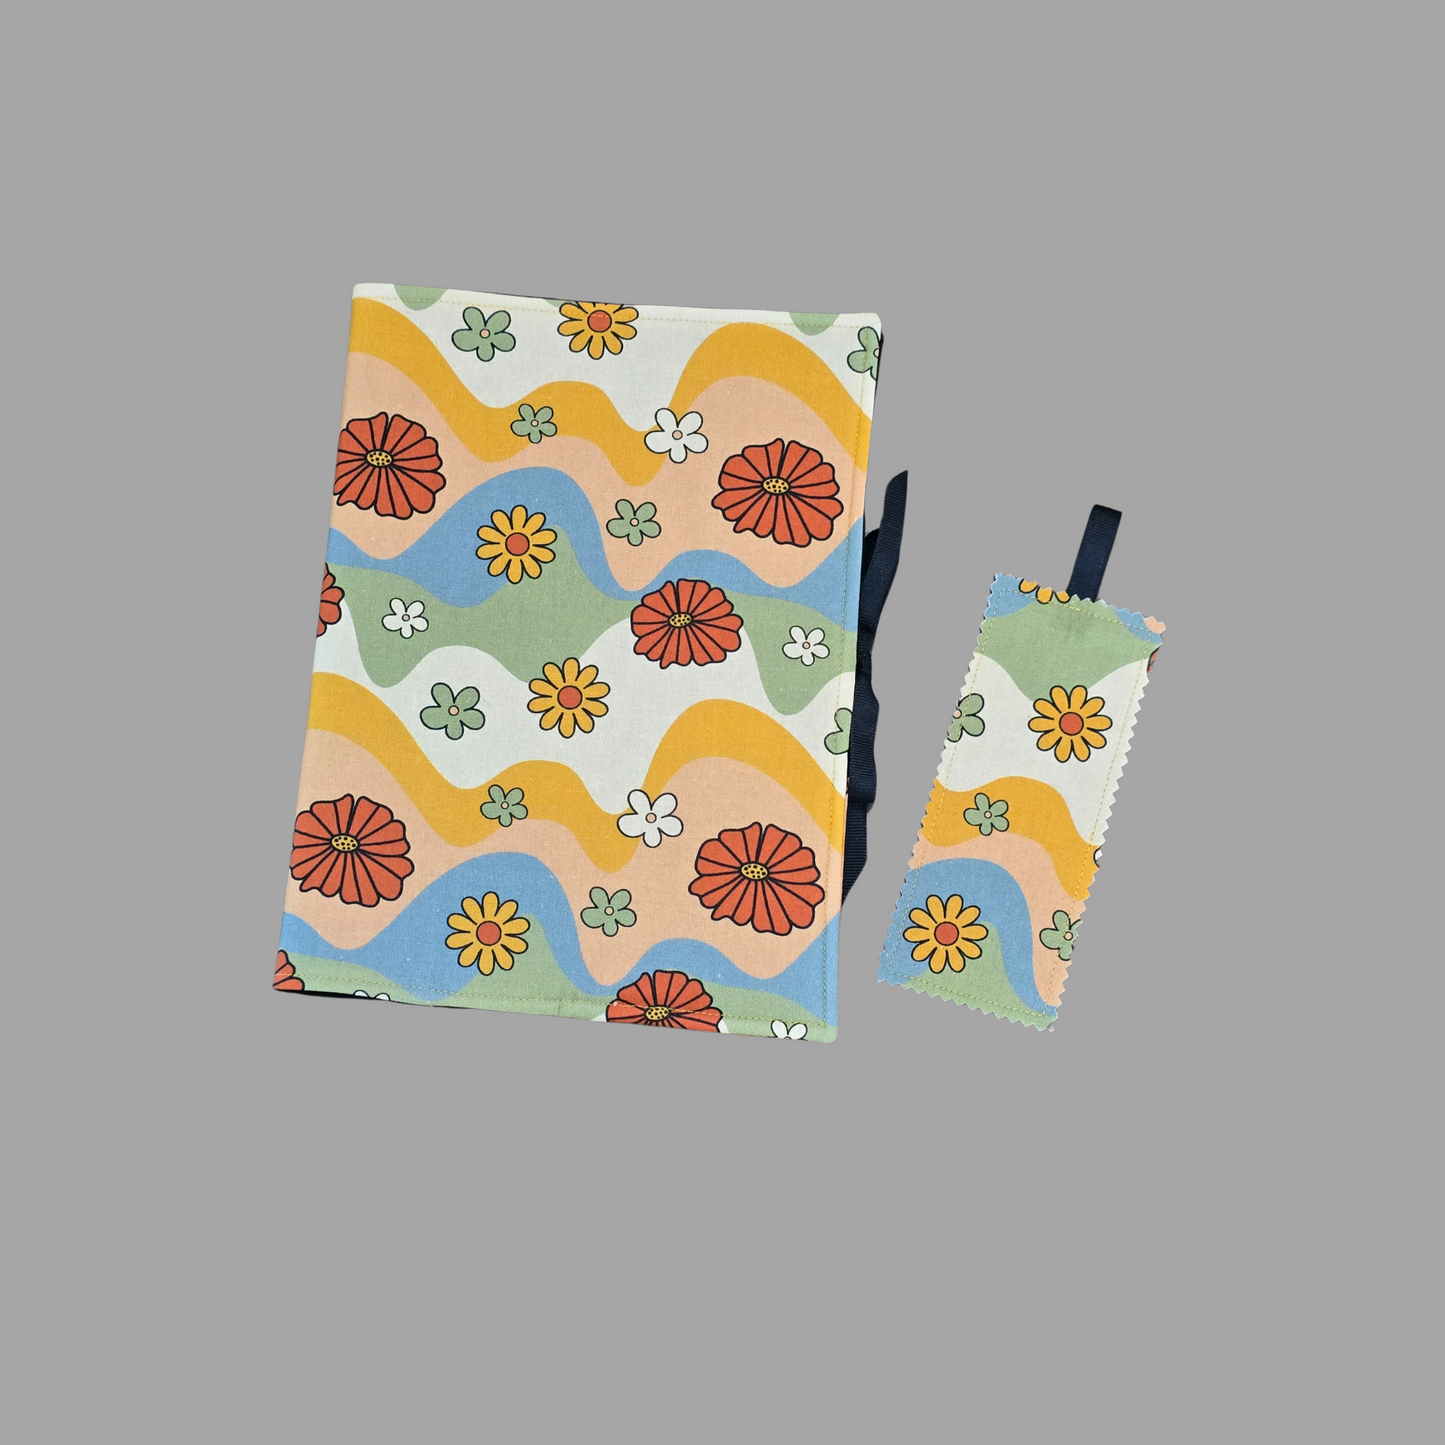 Groovy Flowers Composition Book Cover Retro Waves School Office Journal Diary